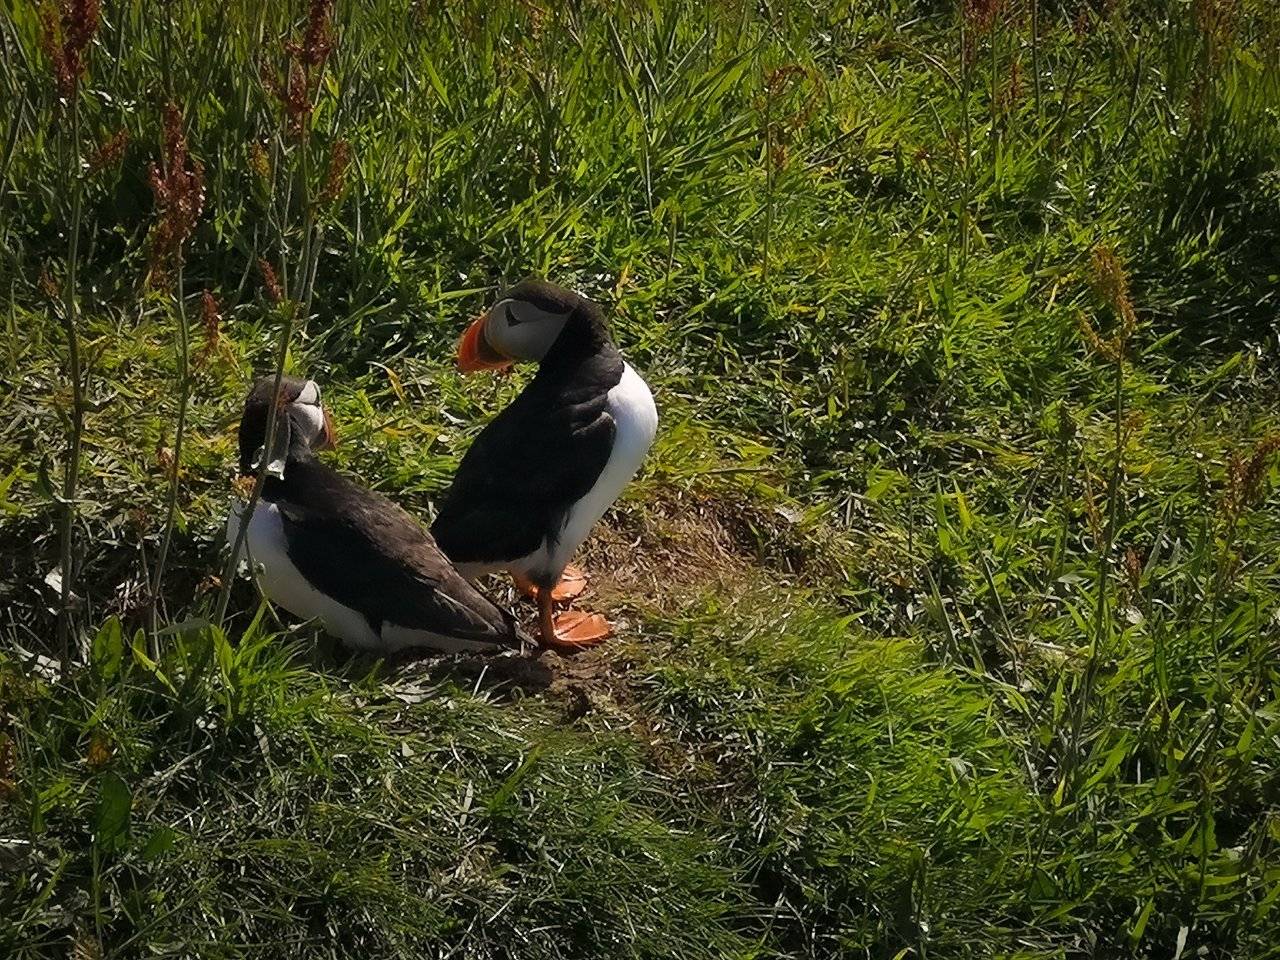 Two puffins looking at each other, the Treshnish Isles wildlife tour, Scotland